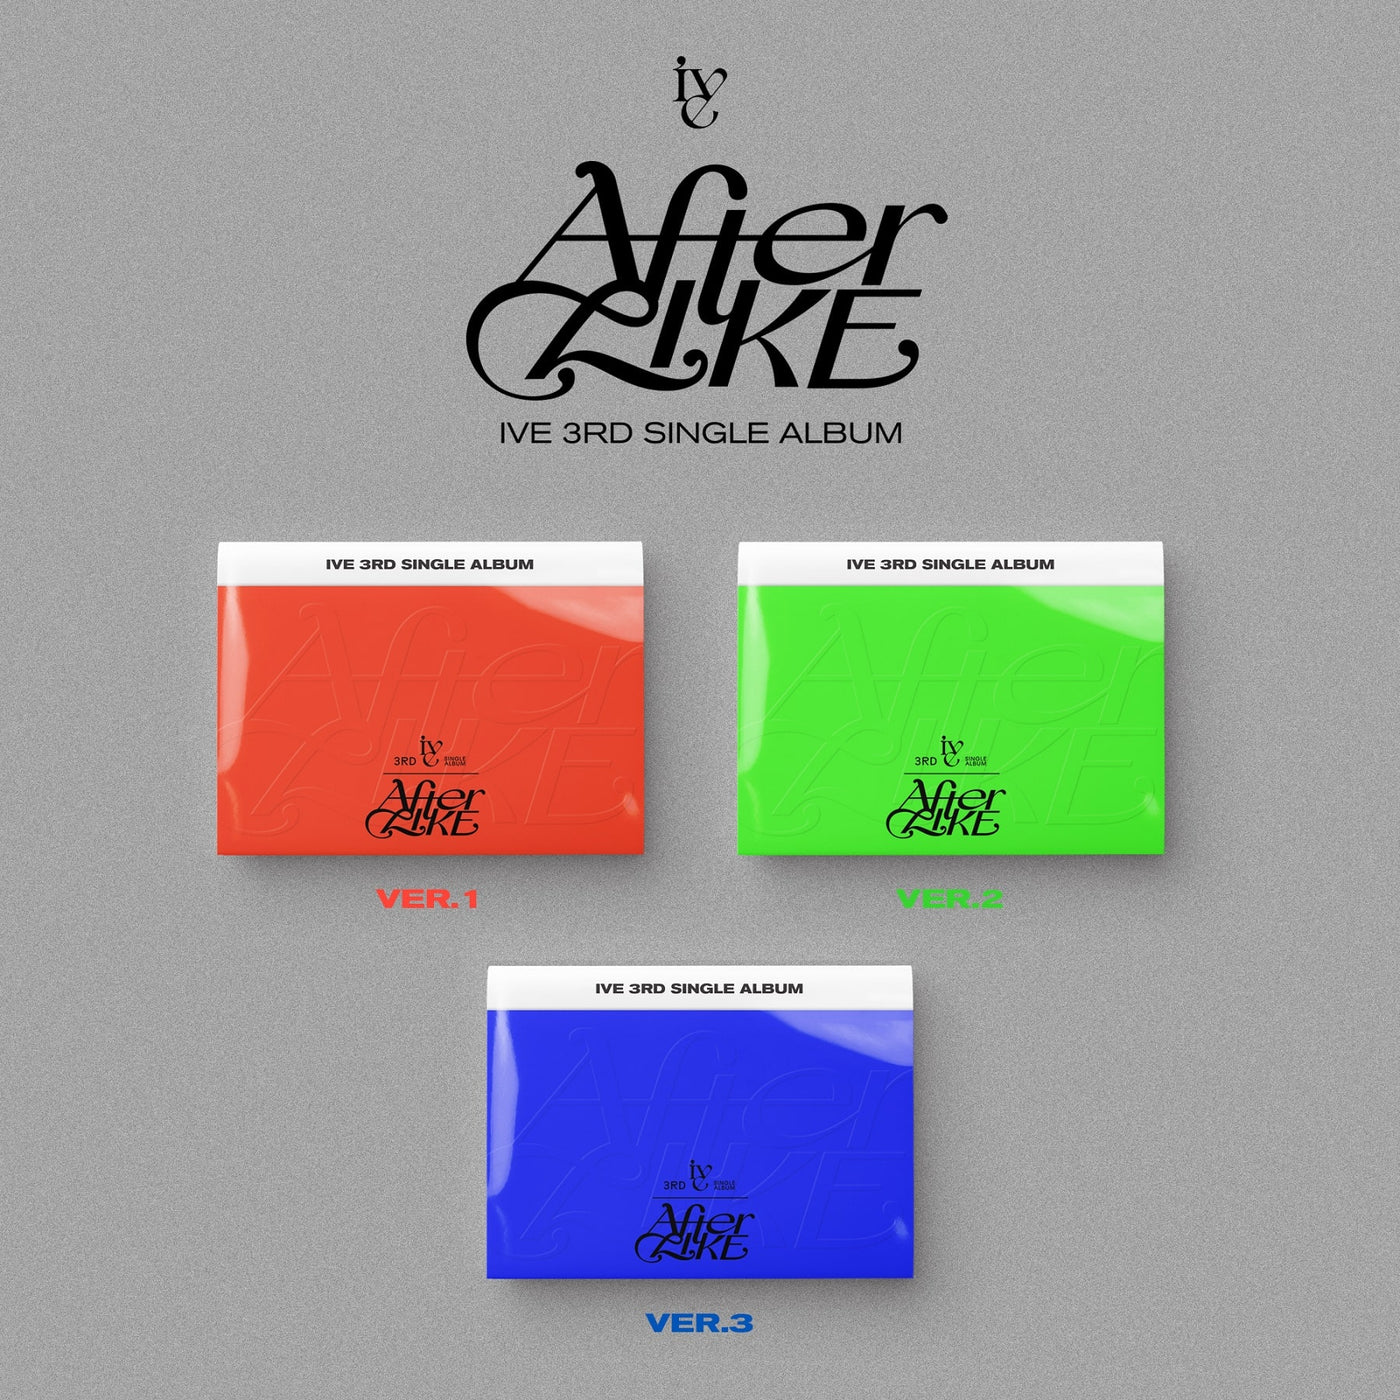 IVE 3rd Single Album - [After Like] (PHOTO BOOK VER.) 🇰🇷